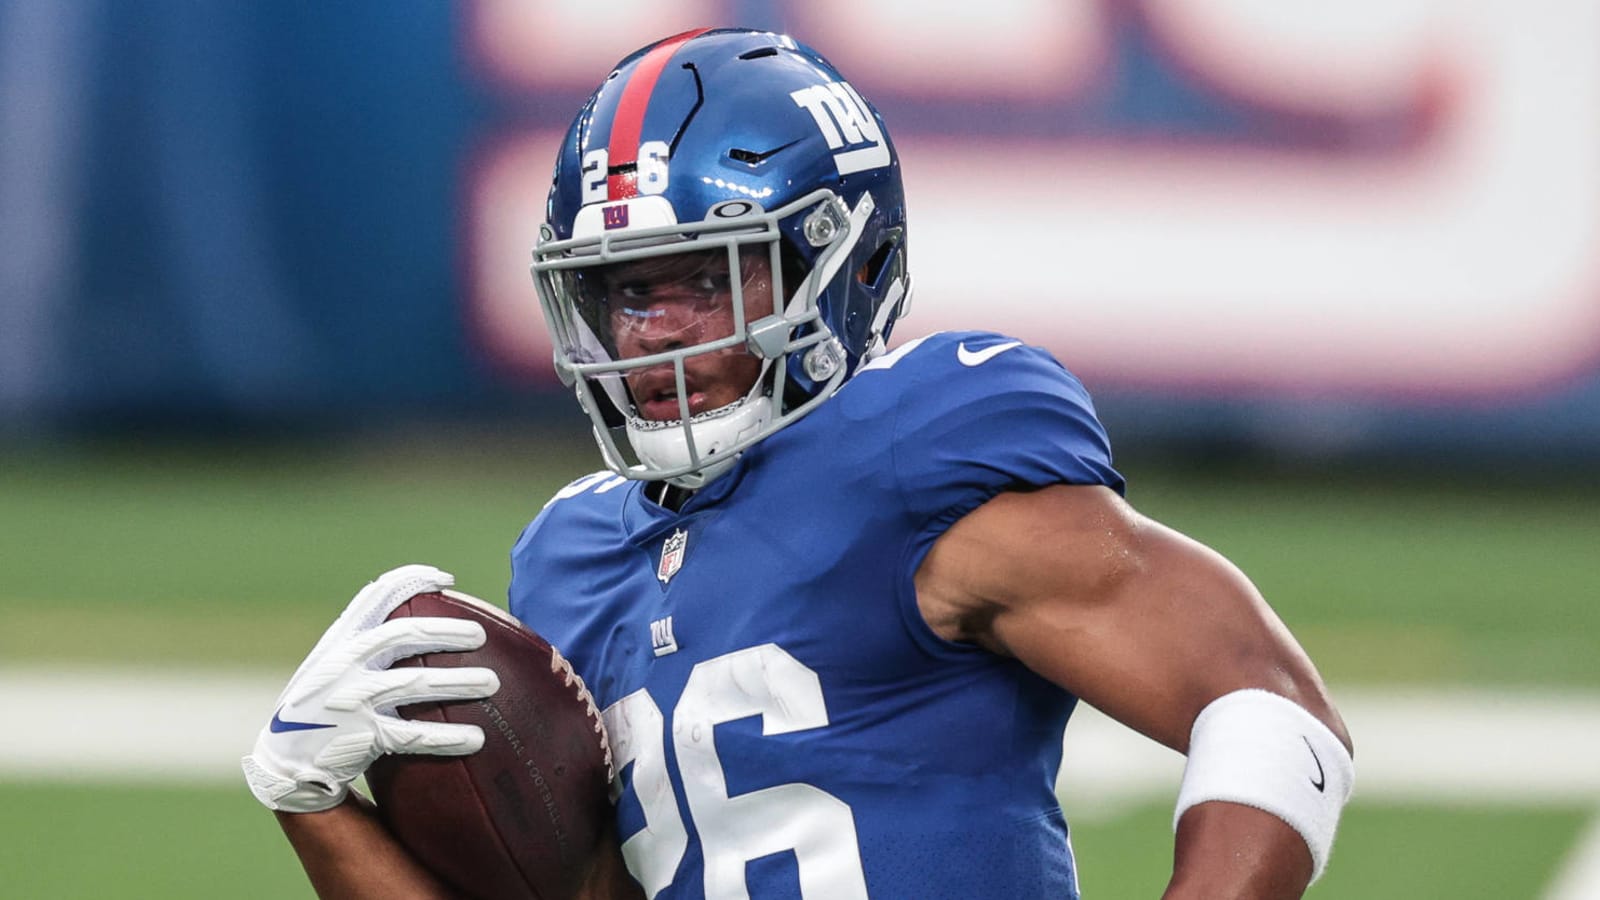 Saquon Barkley likely to sit out preseason